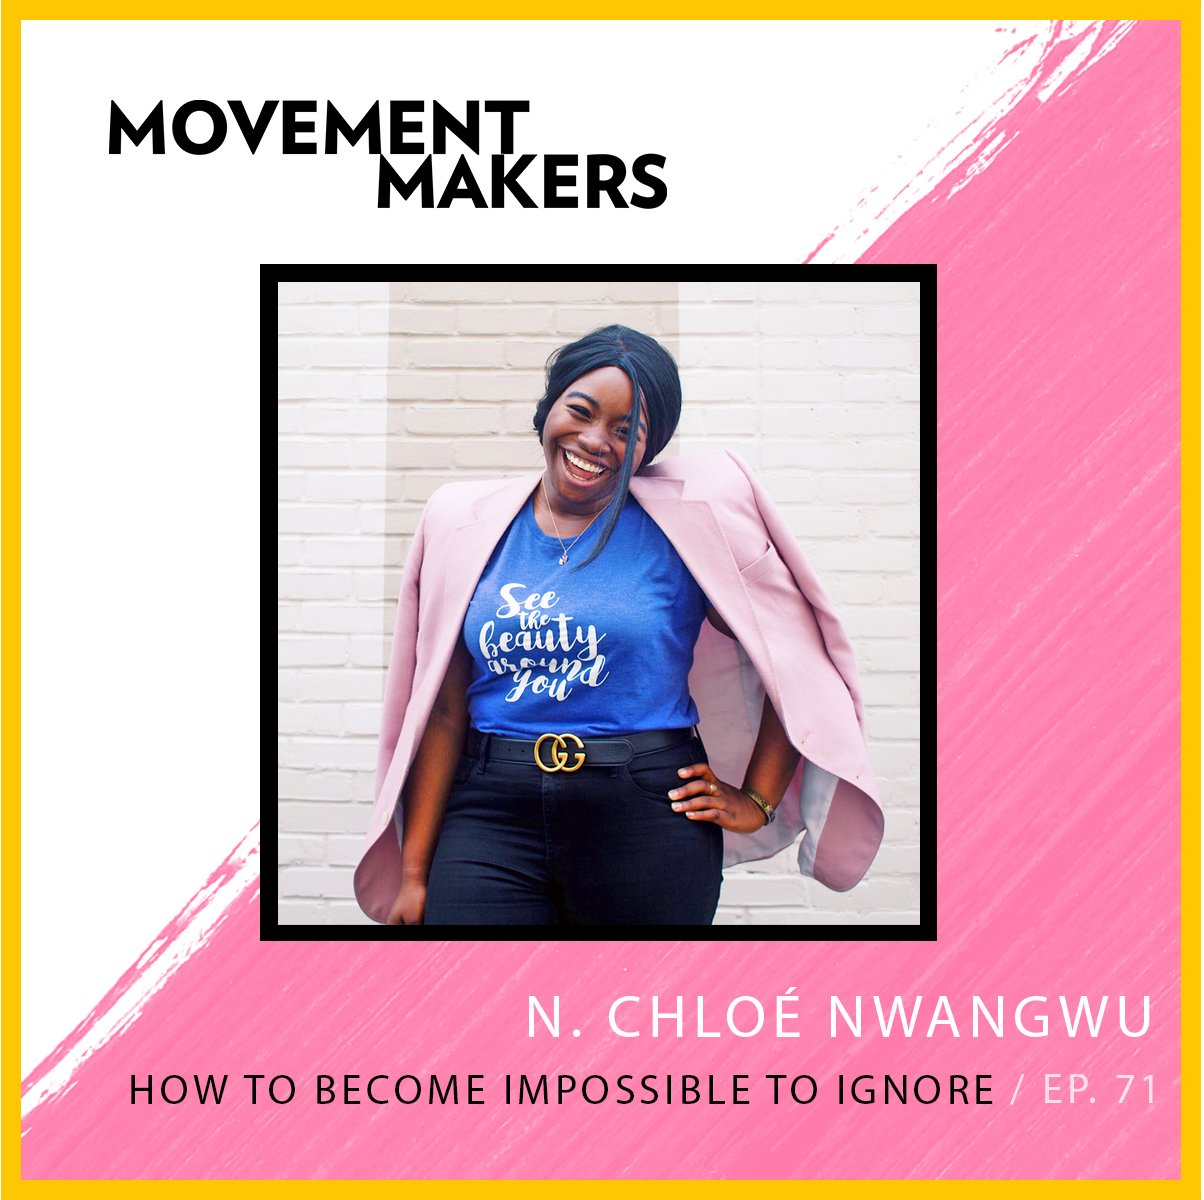 How To Become Impossible To Ignore With N. Chloé Nwangwu — Nikki Groom